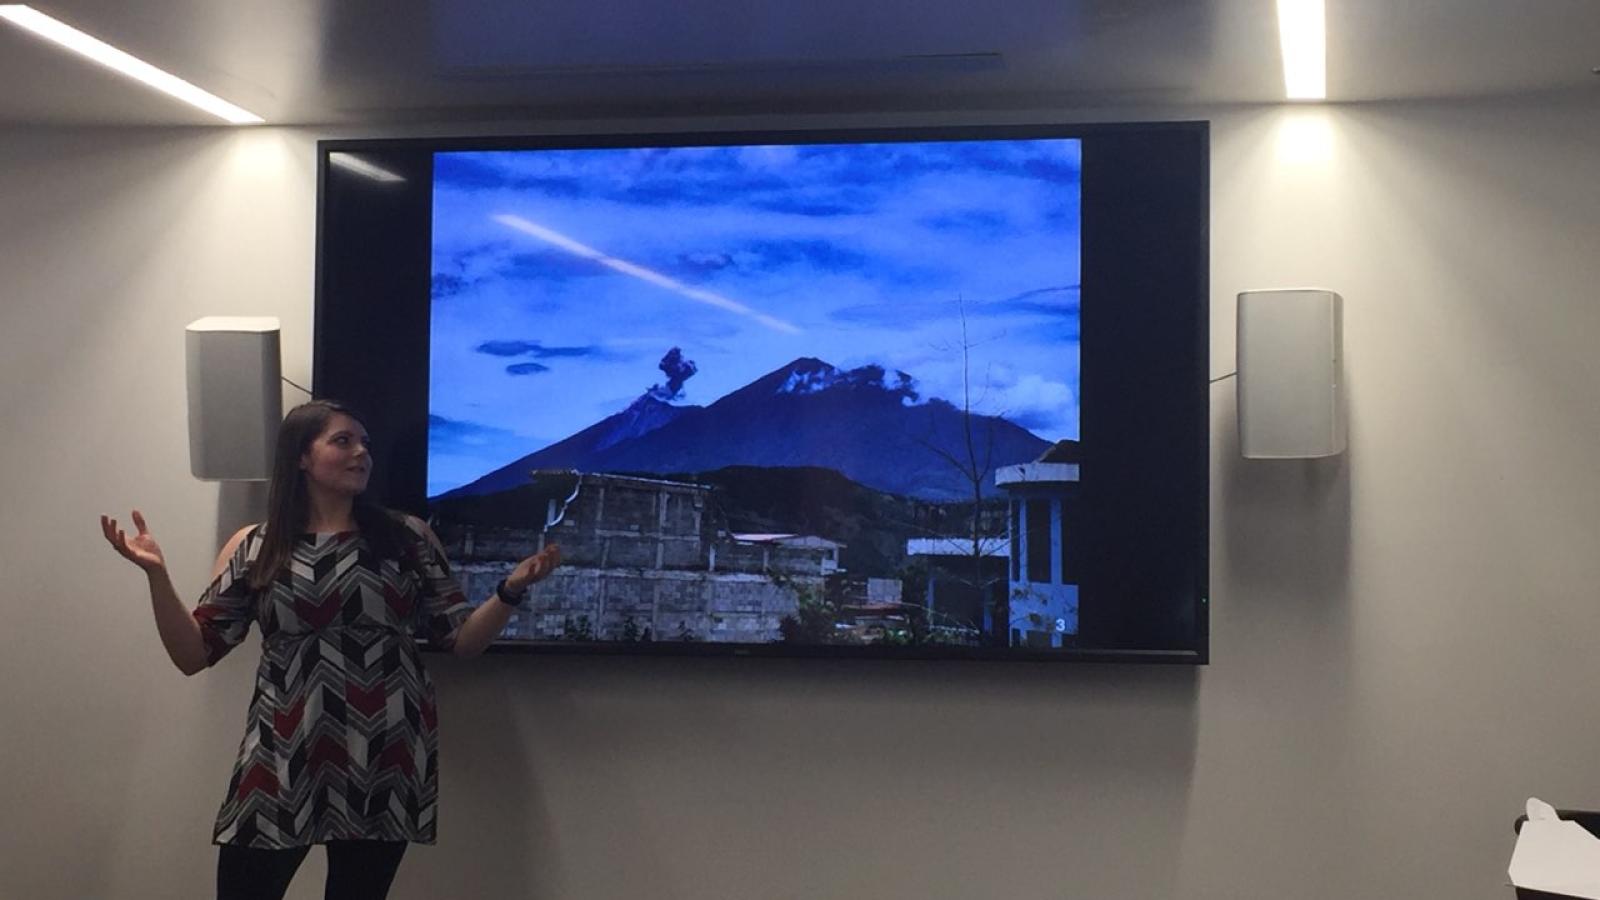 Lindsey giving a talk about her work on volcanoes in Guatemala